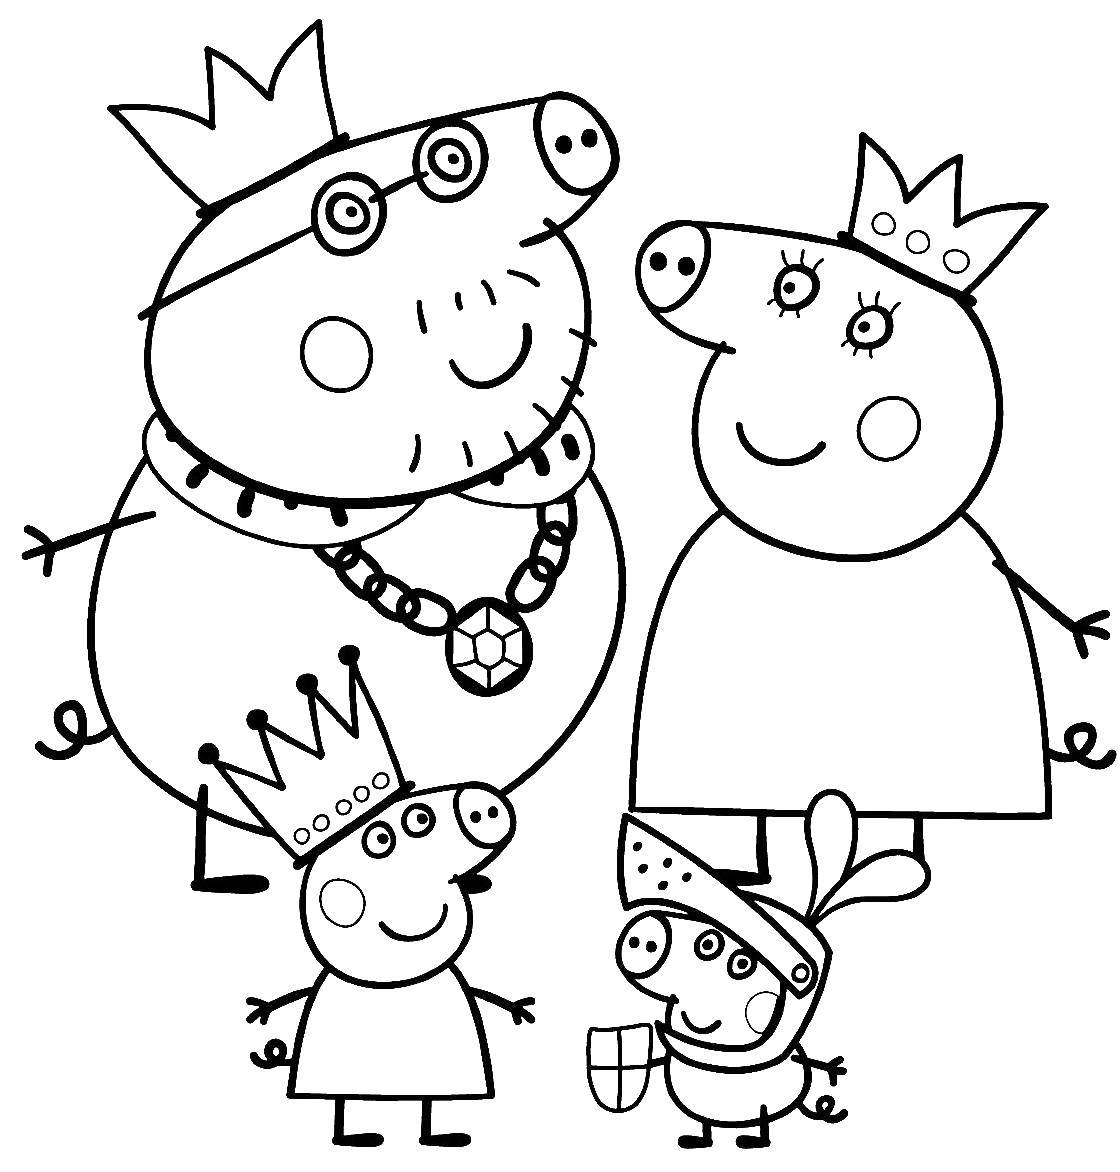 Coloring Family in peppa. Category Peppa Pig. Tags:  Peppa pig, cartoon.